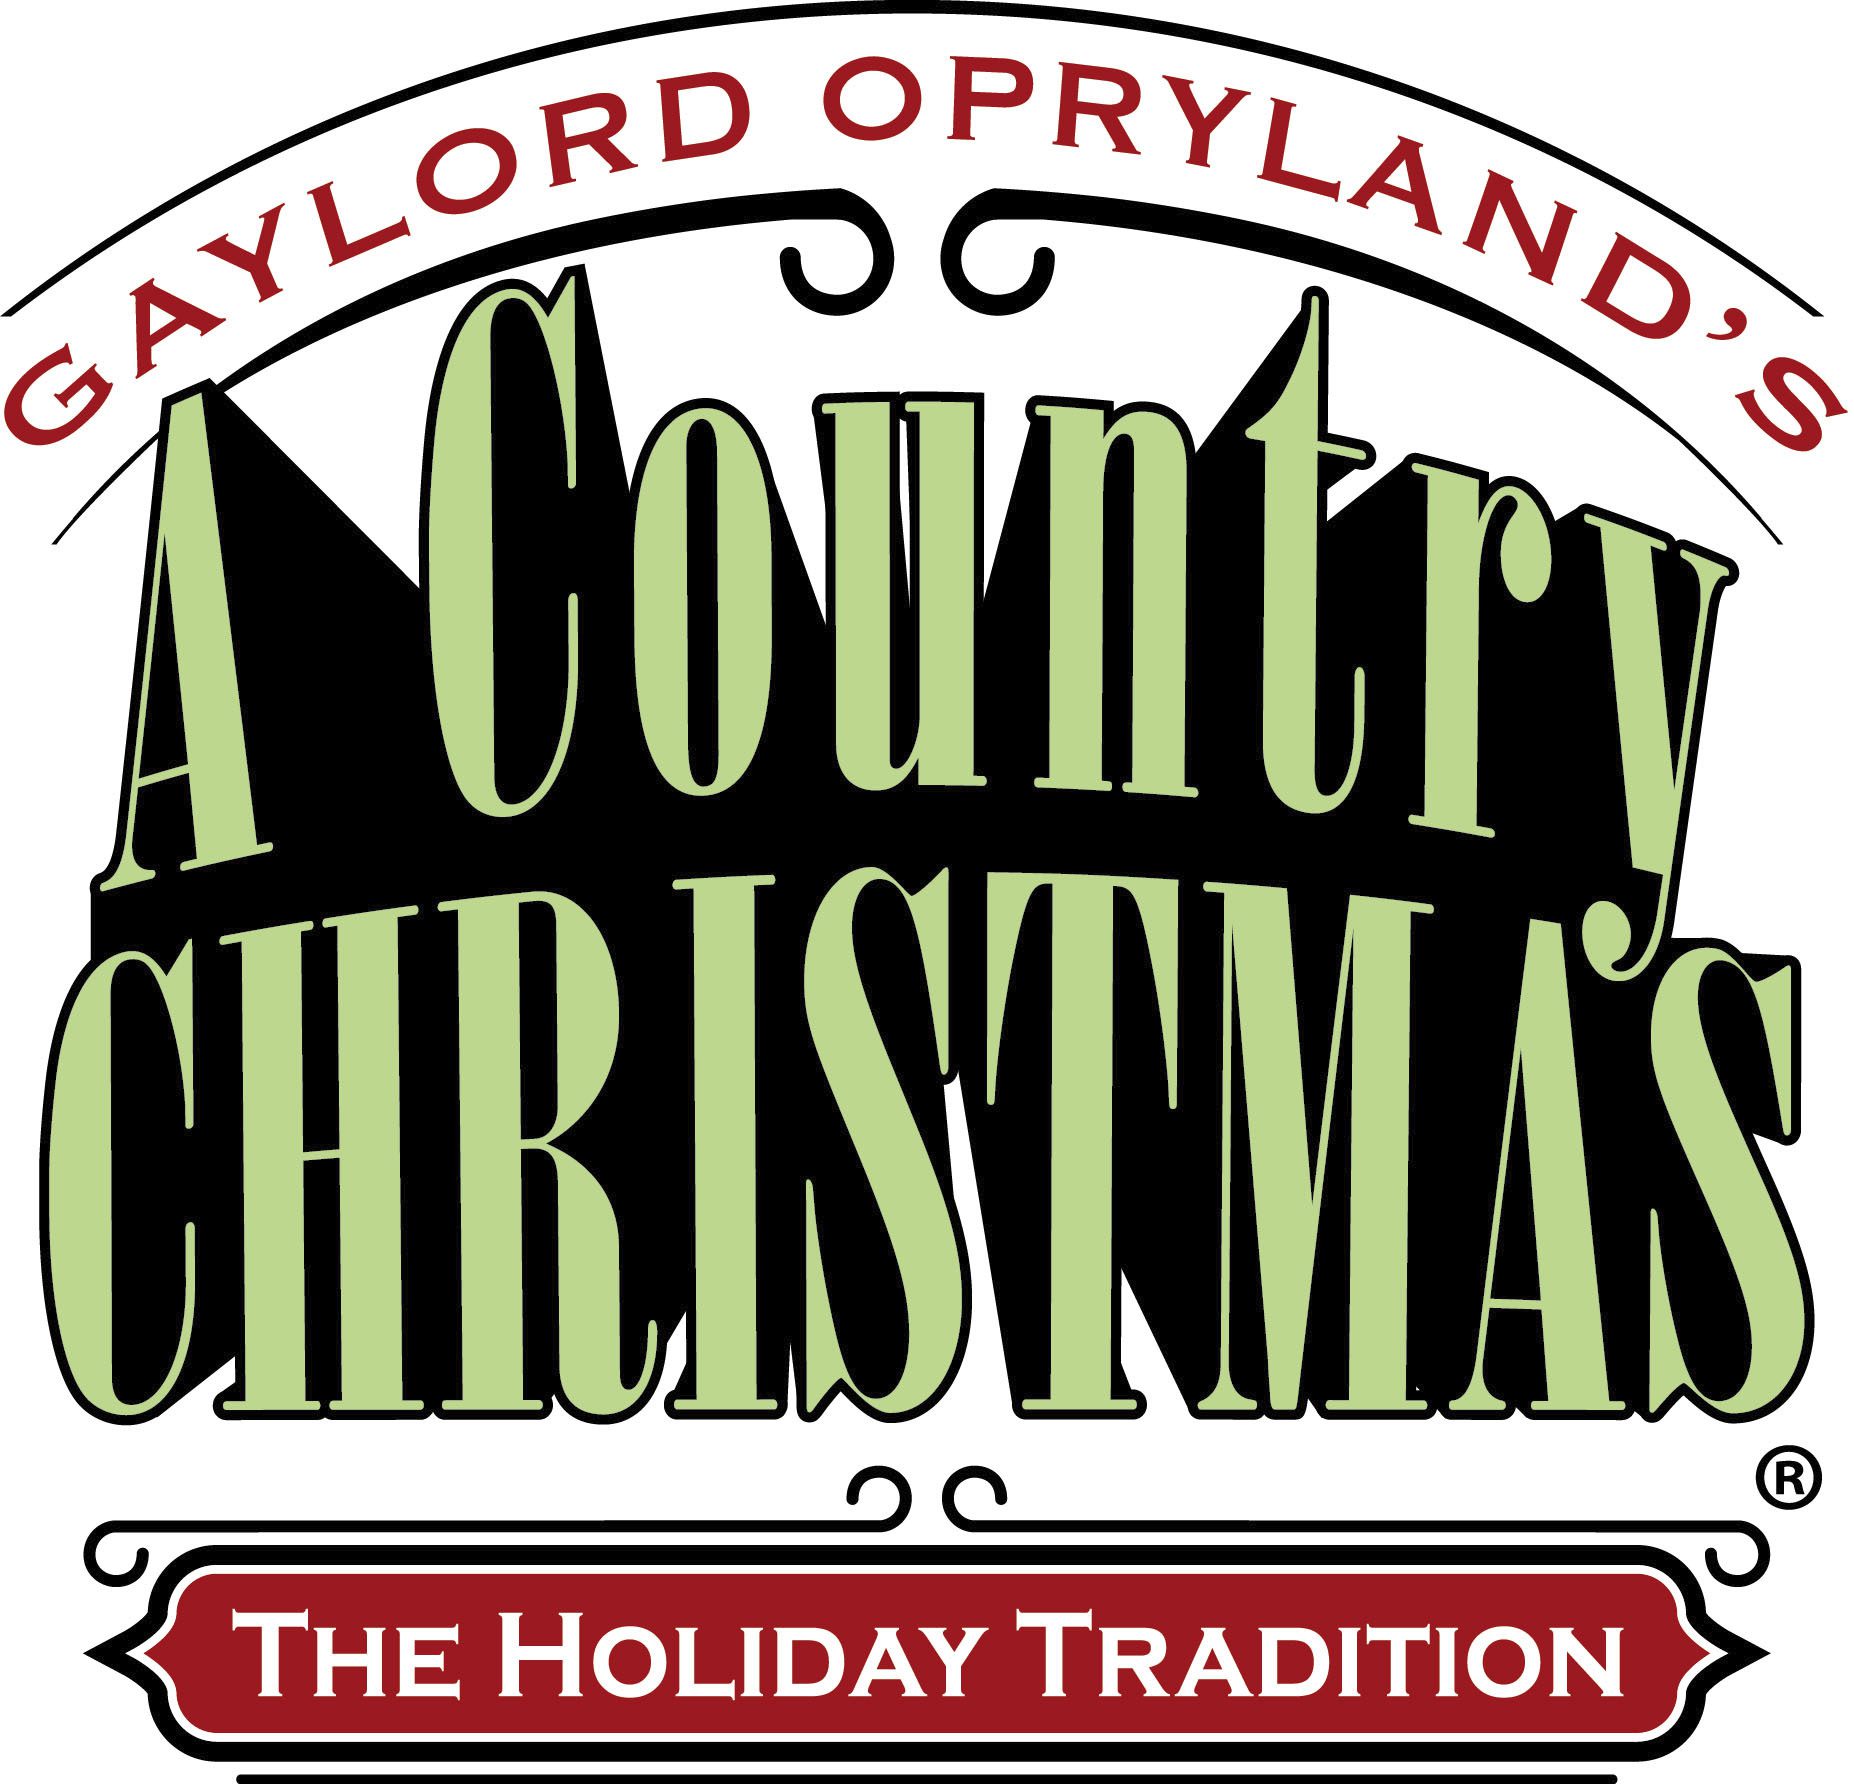 A Country Christmas Nashville Tenn - Events at Gaylord Opryland.